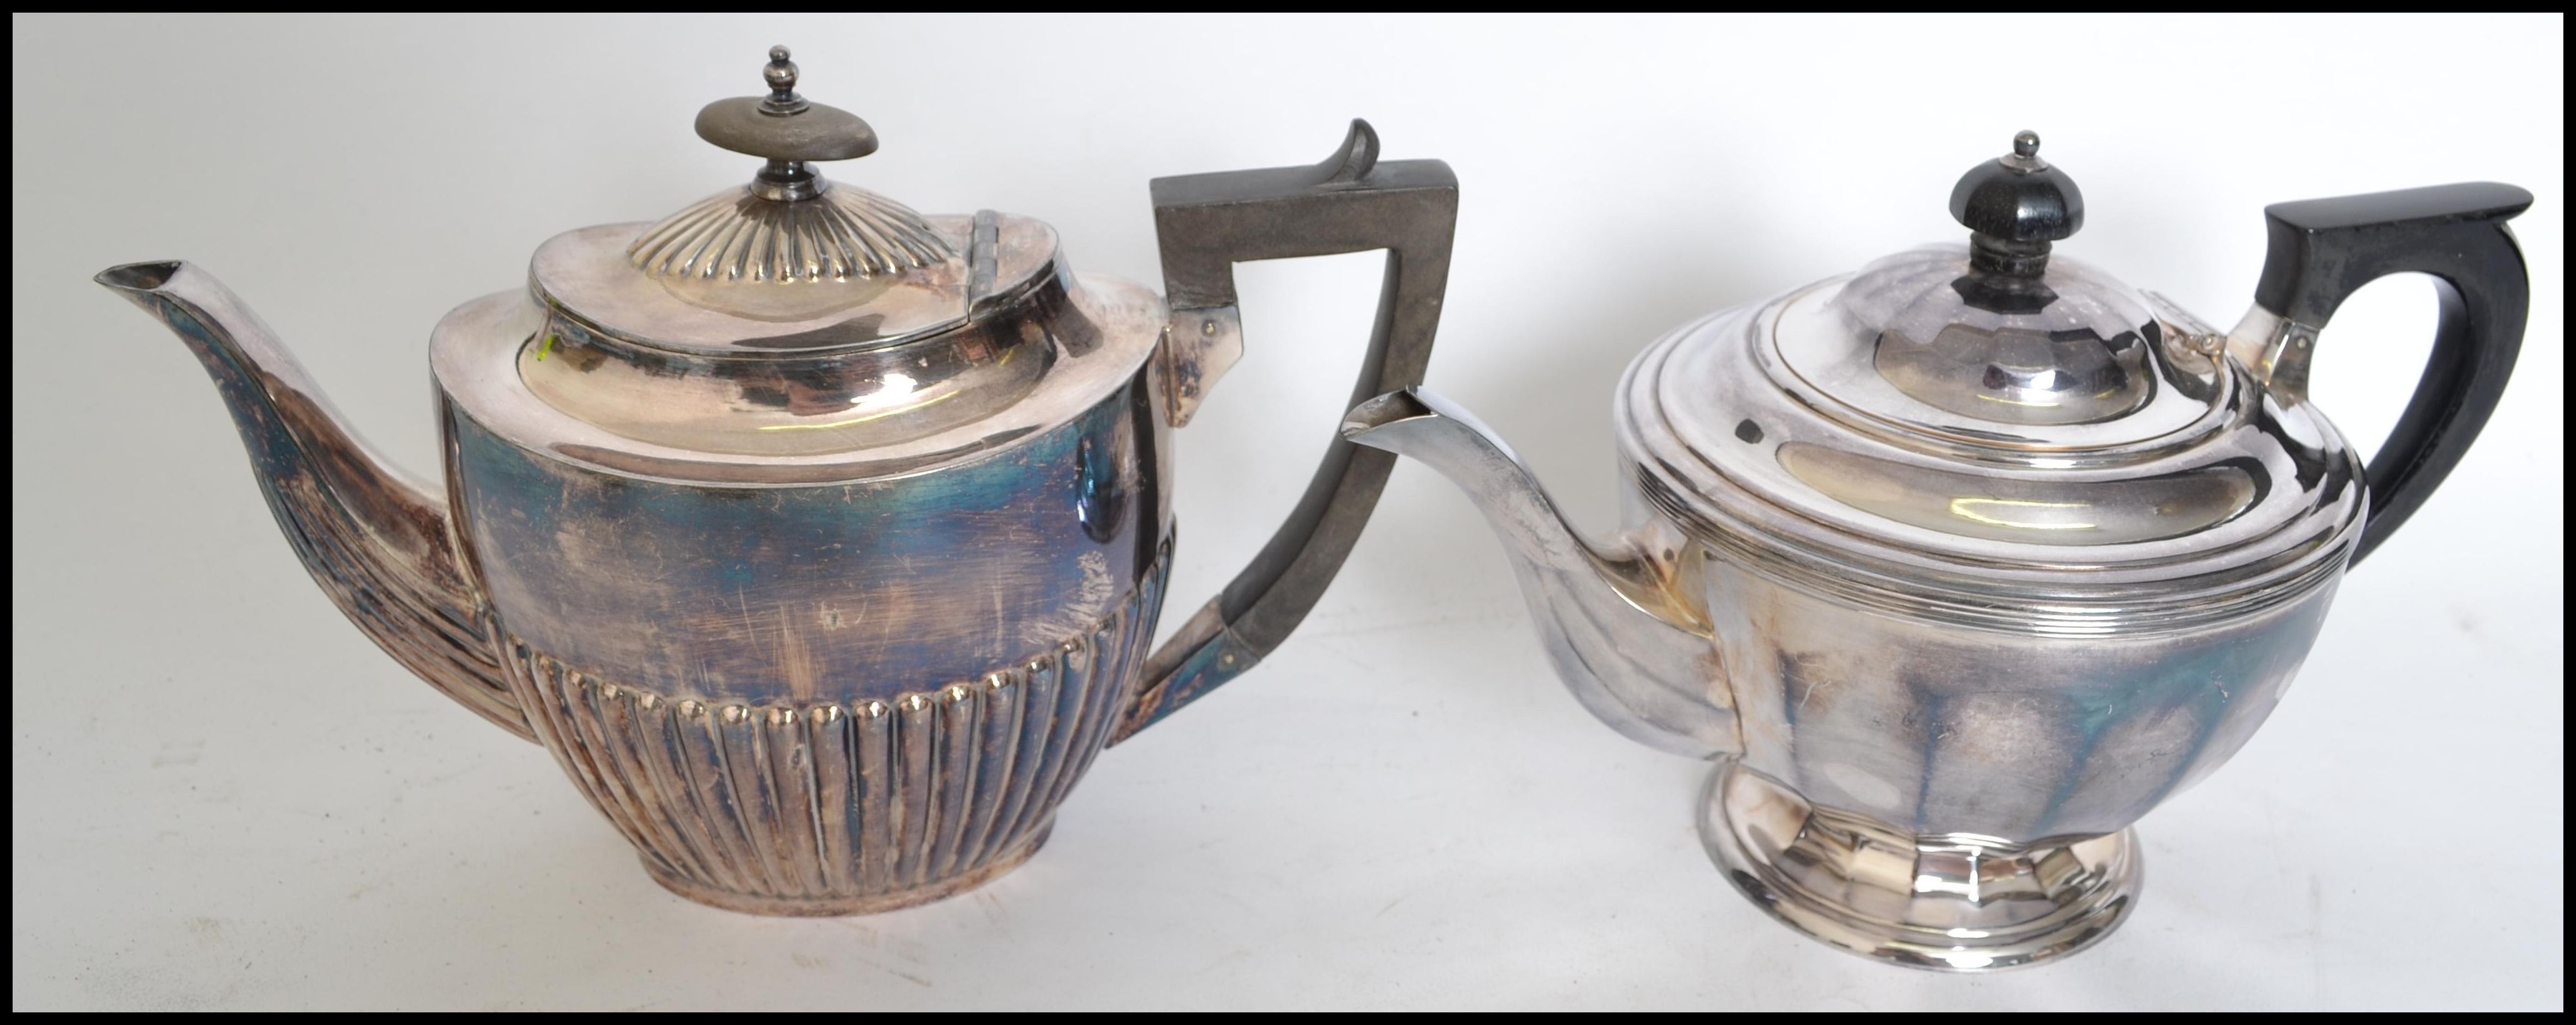 Two silver plate tea services one being an Elkingt - Image 2 of 9